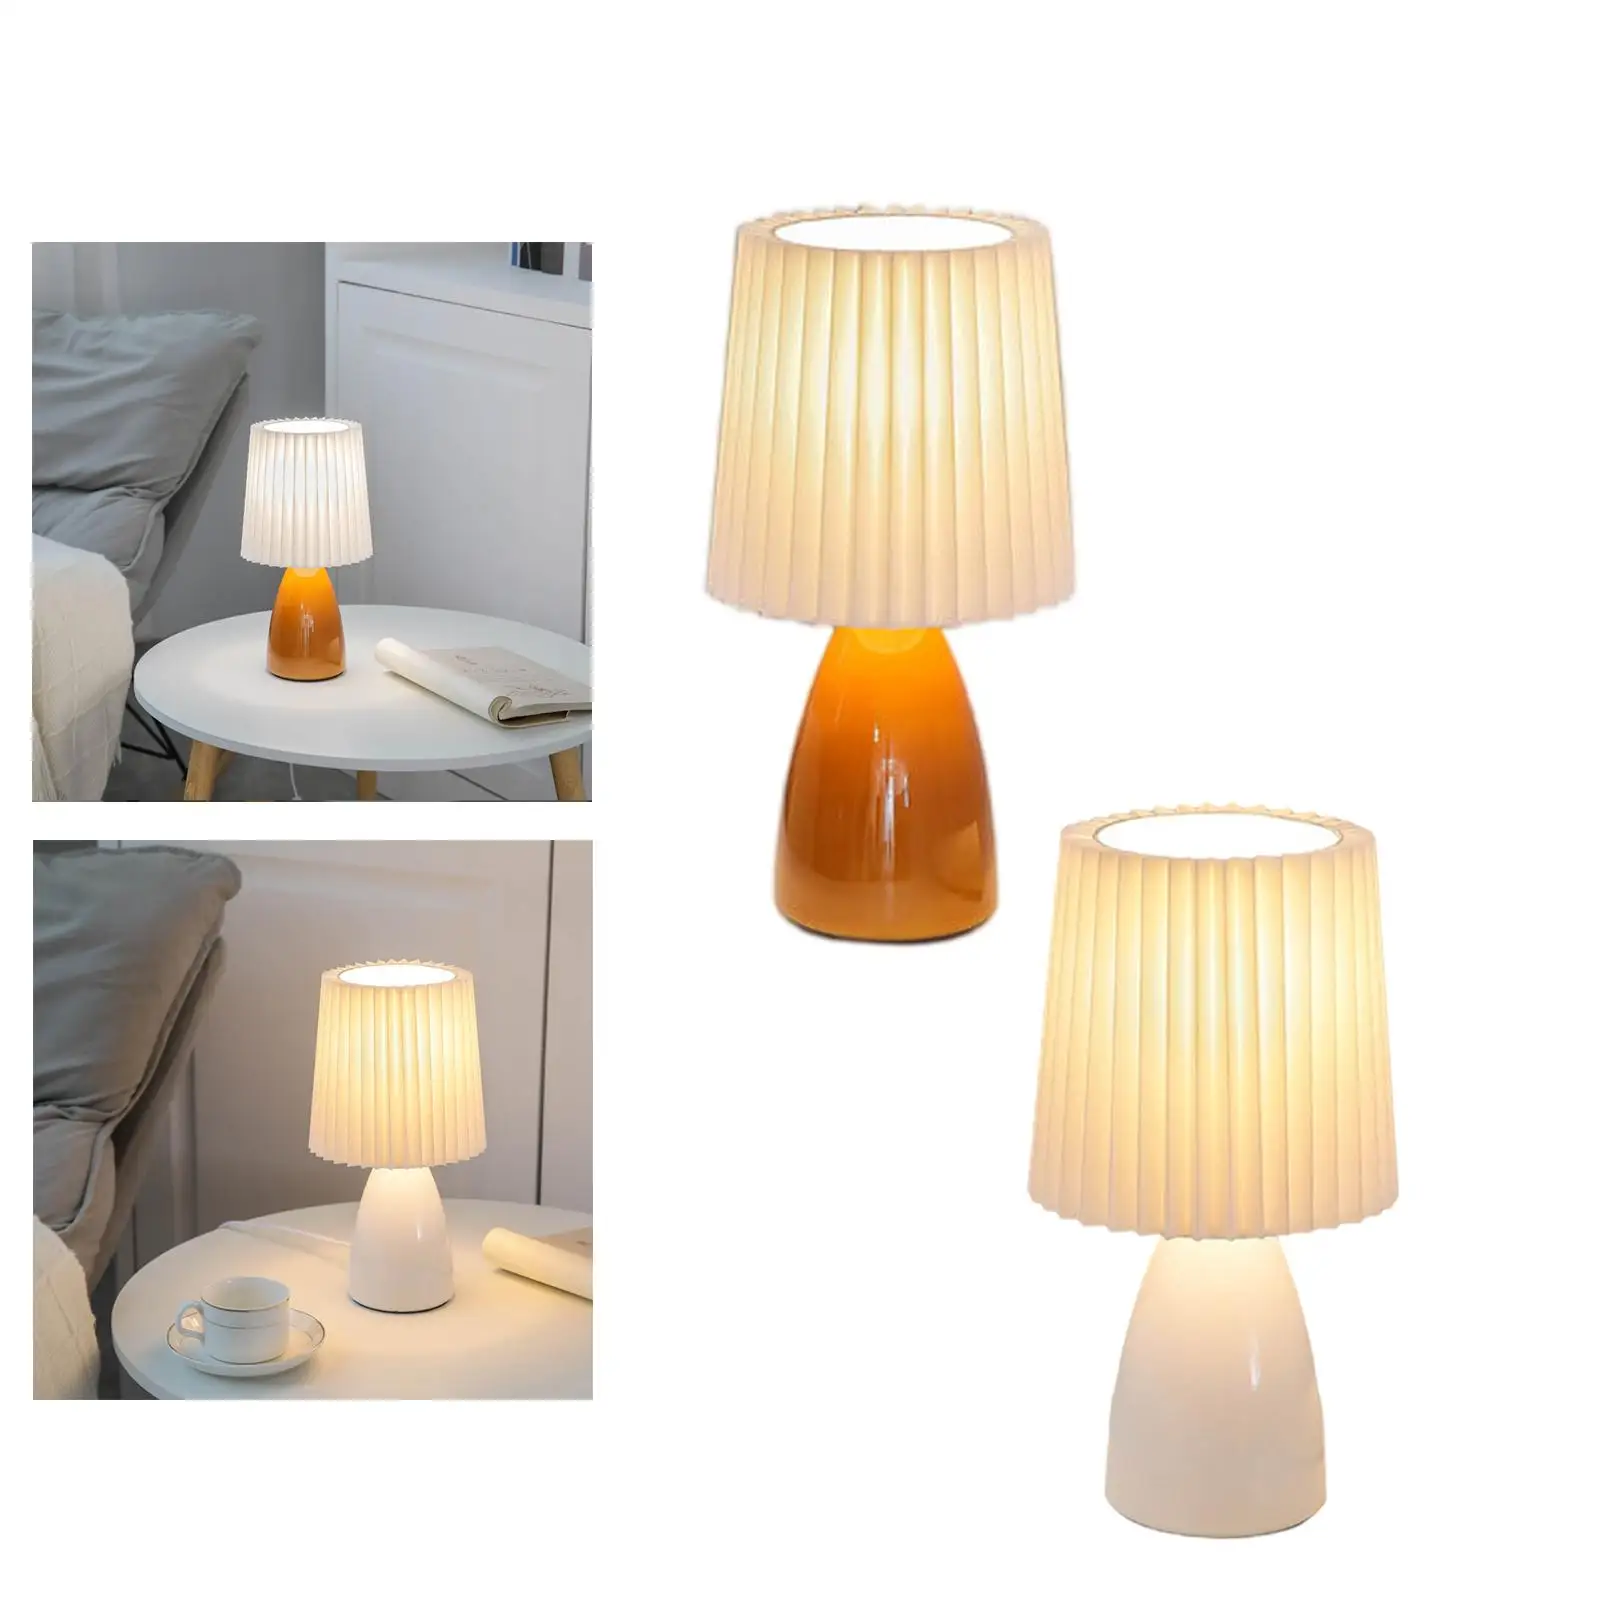 Glass LED Desk Lamp For Bedroom Korean Ins Style Striped Pleated Table Lamp Decor Cute Glass Translucent Bedside Lamp